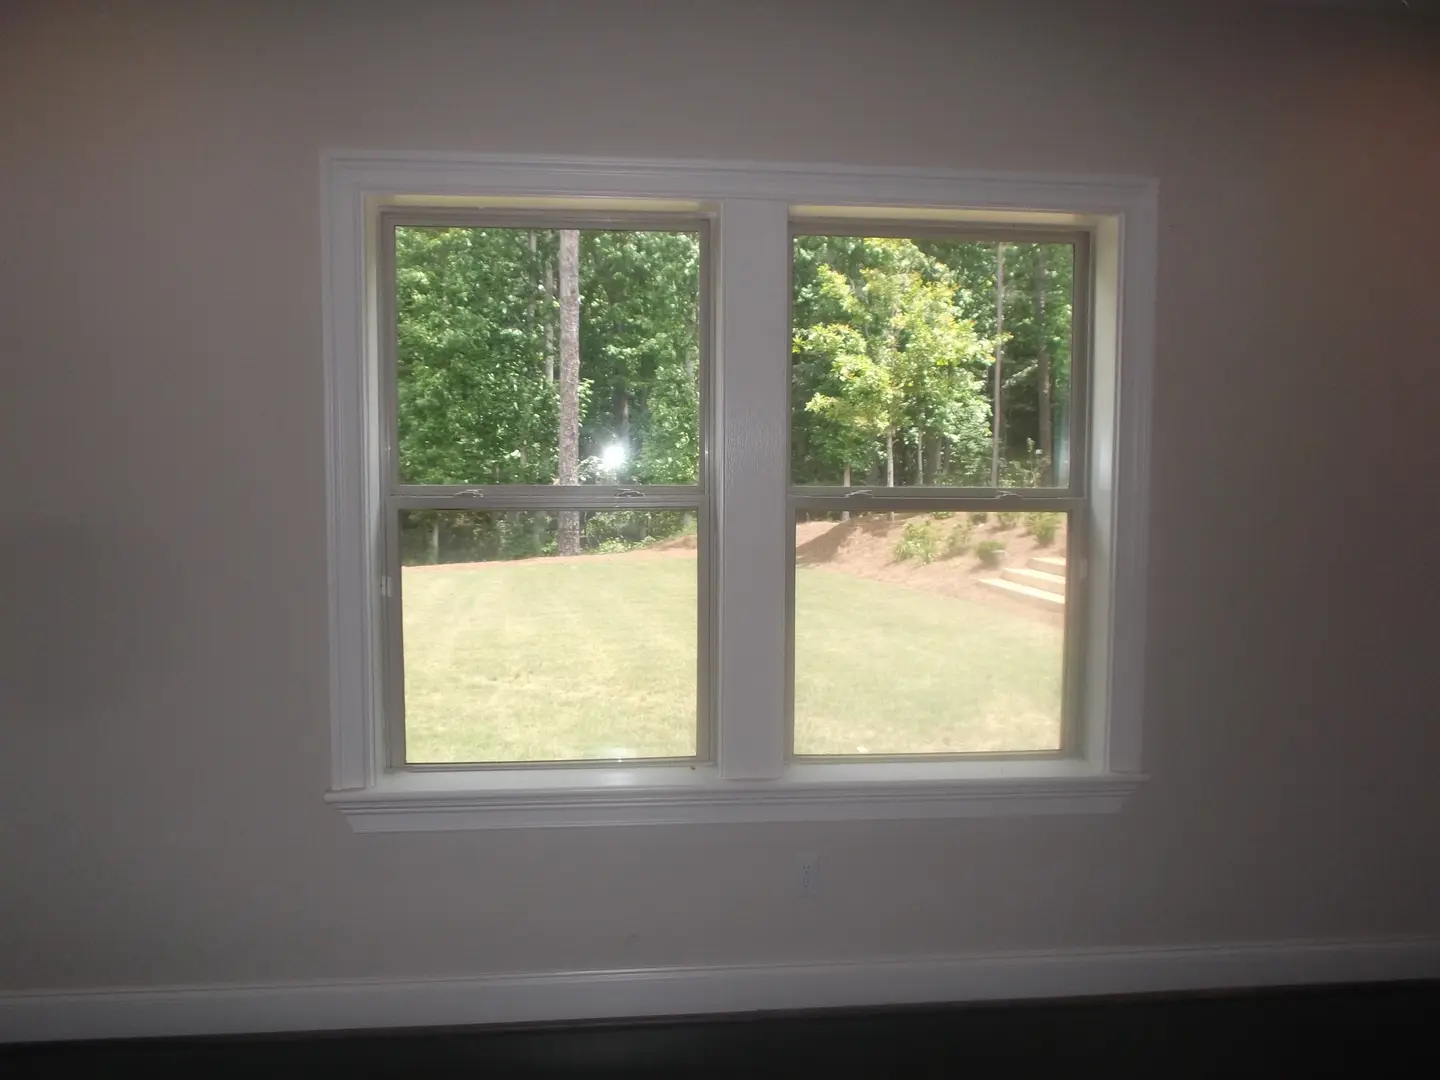 A window with two windows and one is open.